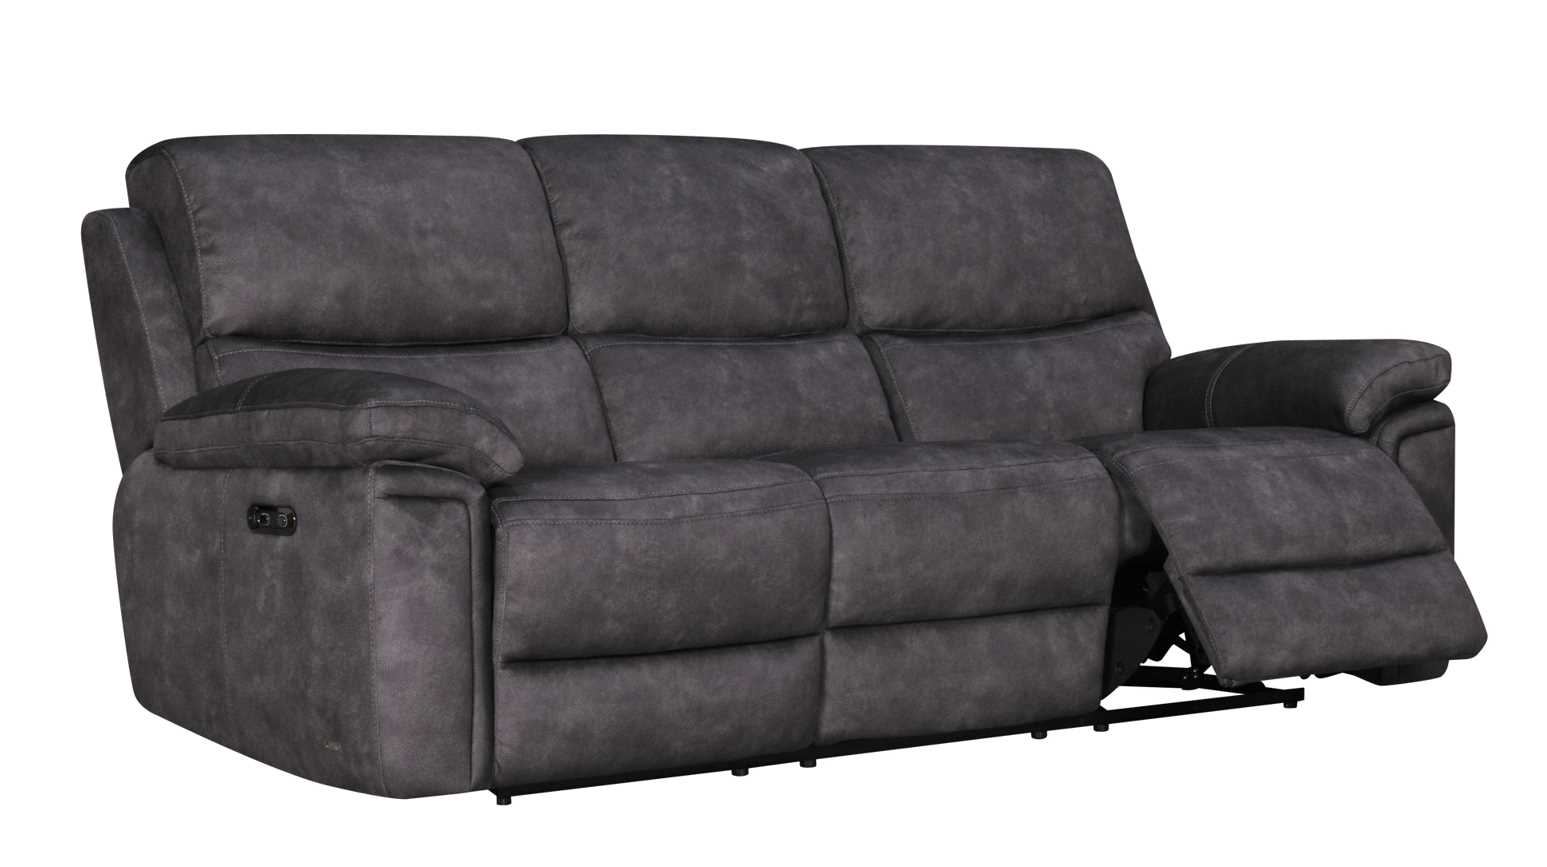 Recline in Style Discovering the Comfort of Chesterfield Sofas with Built-in Recliners  %Post Title